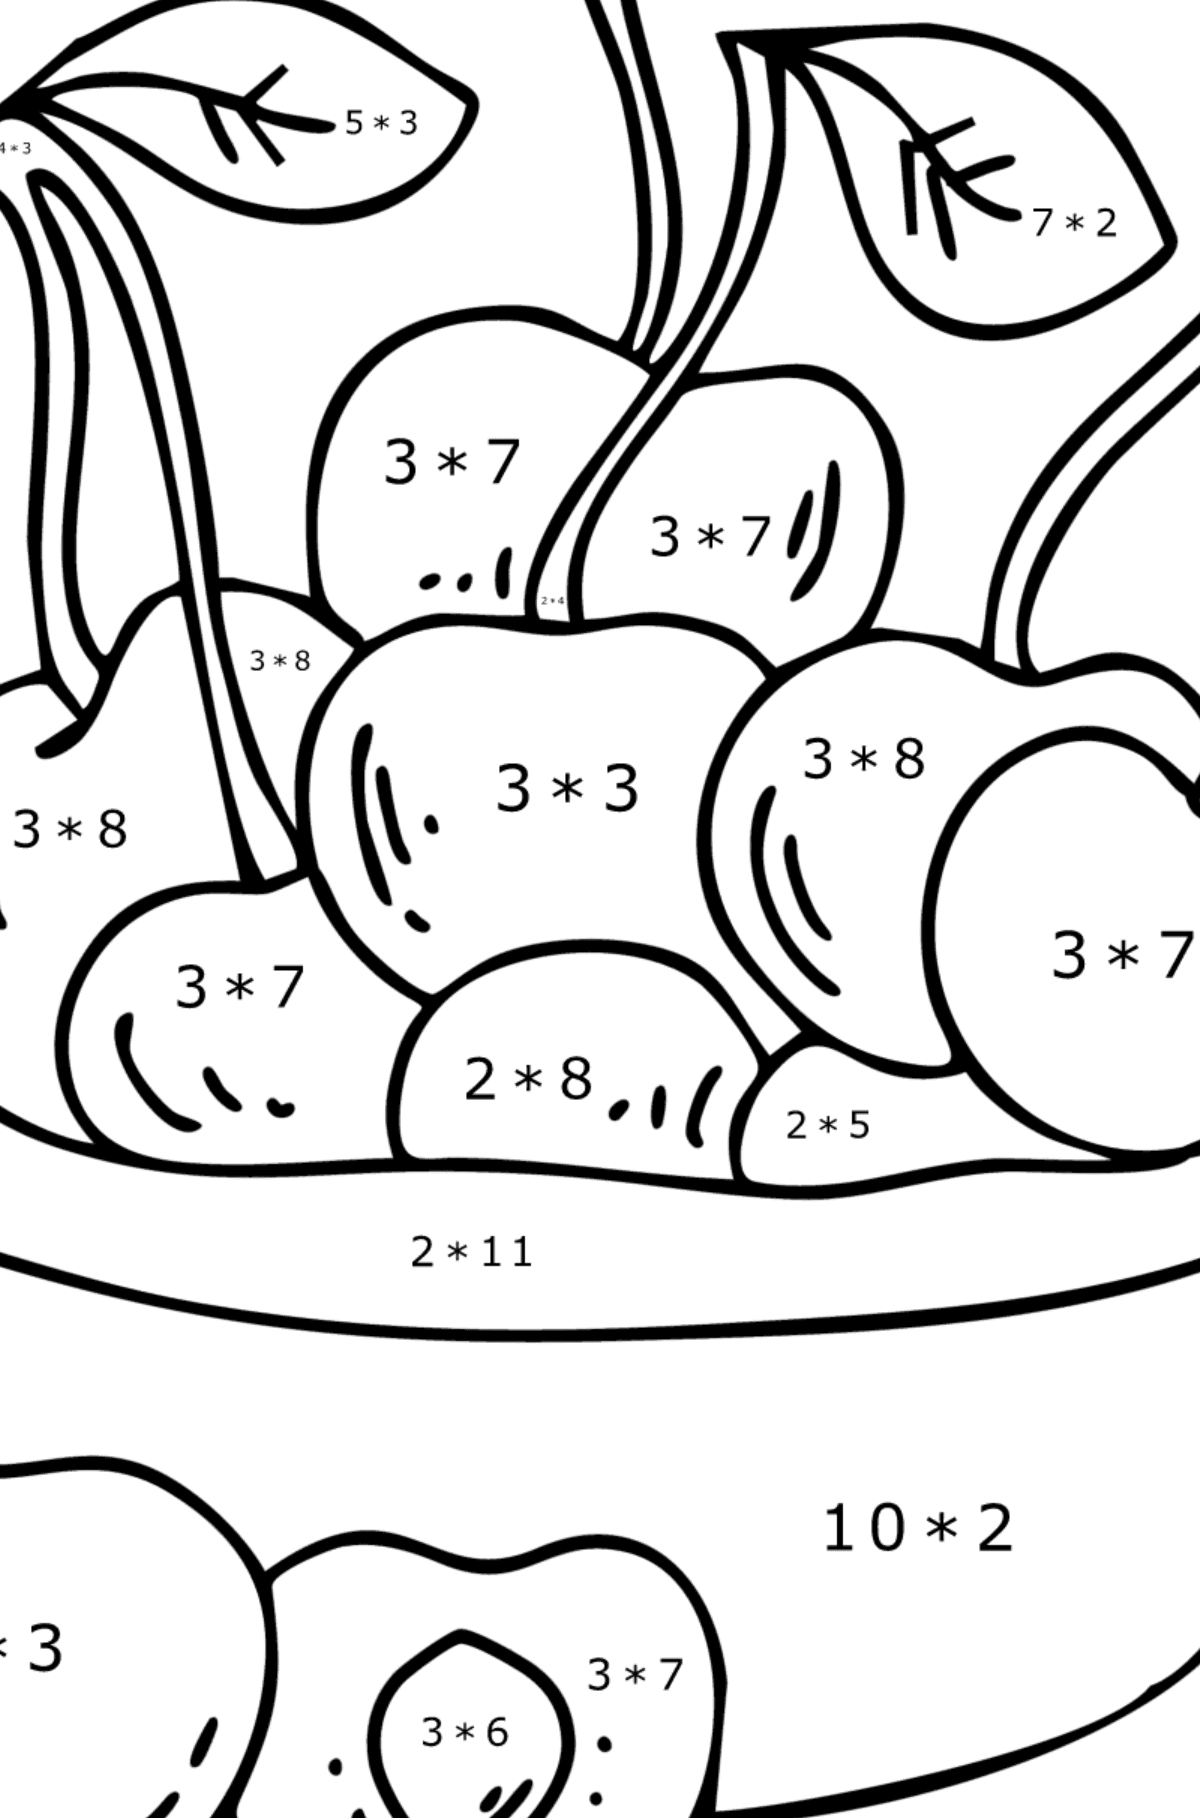 Cherries Plate Coloring Page - Math Coloring - Multiplication for Kids